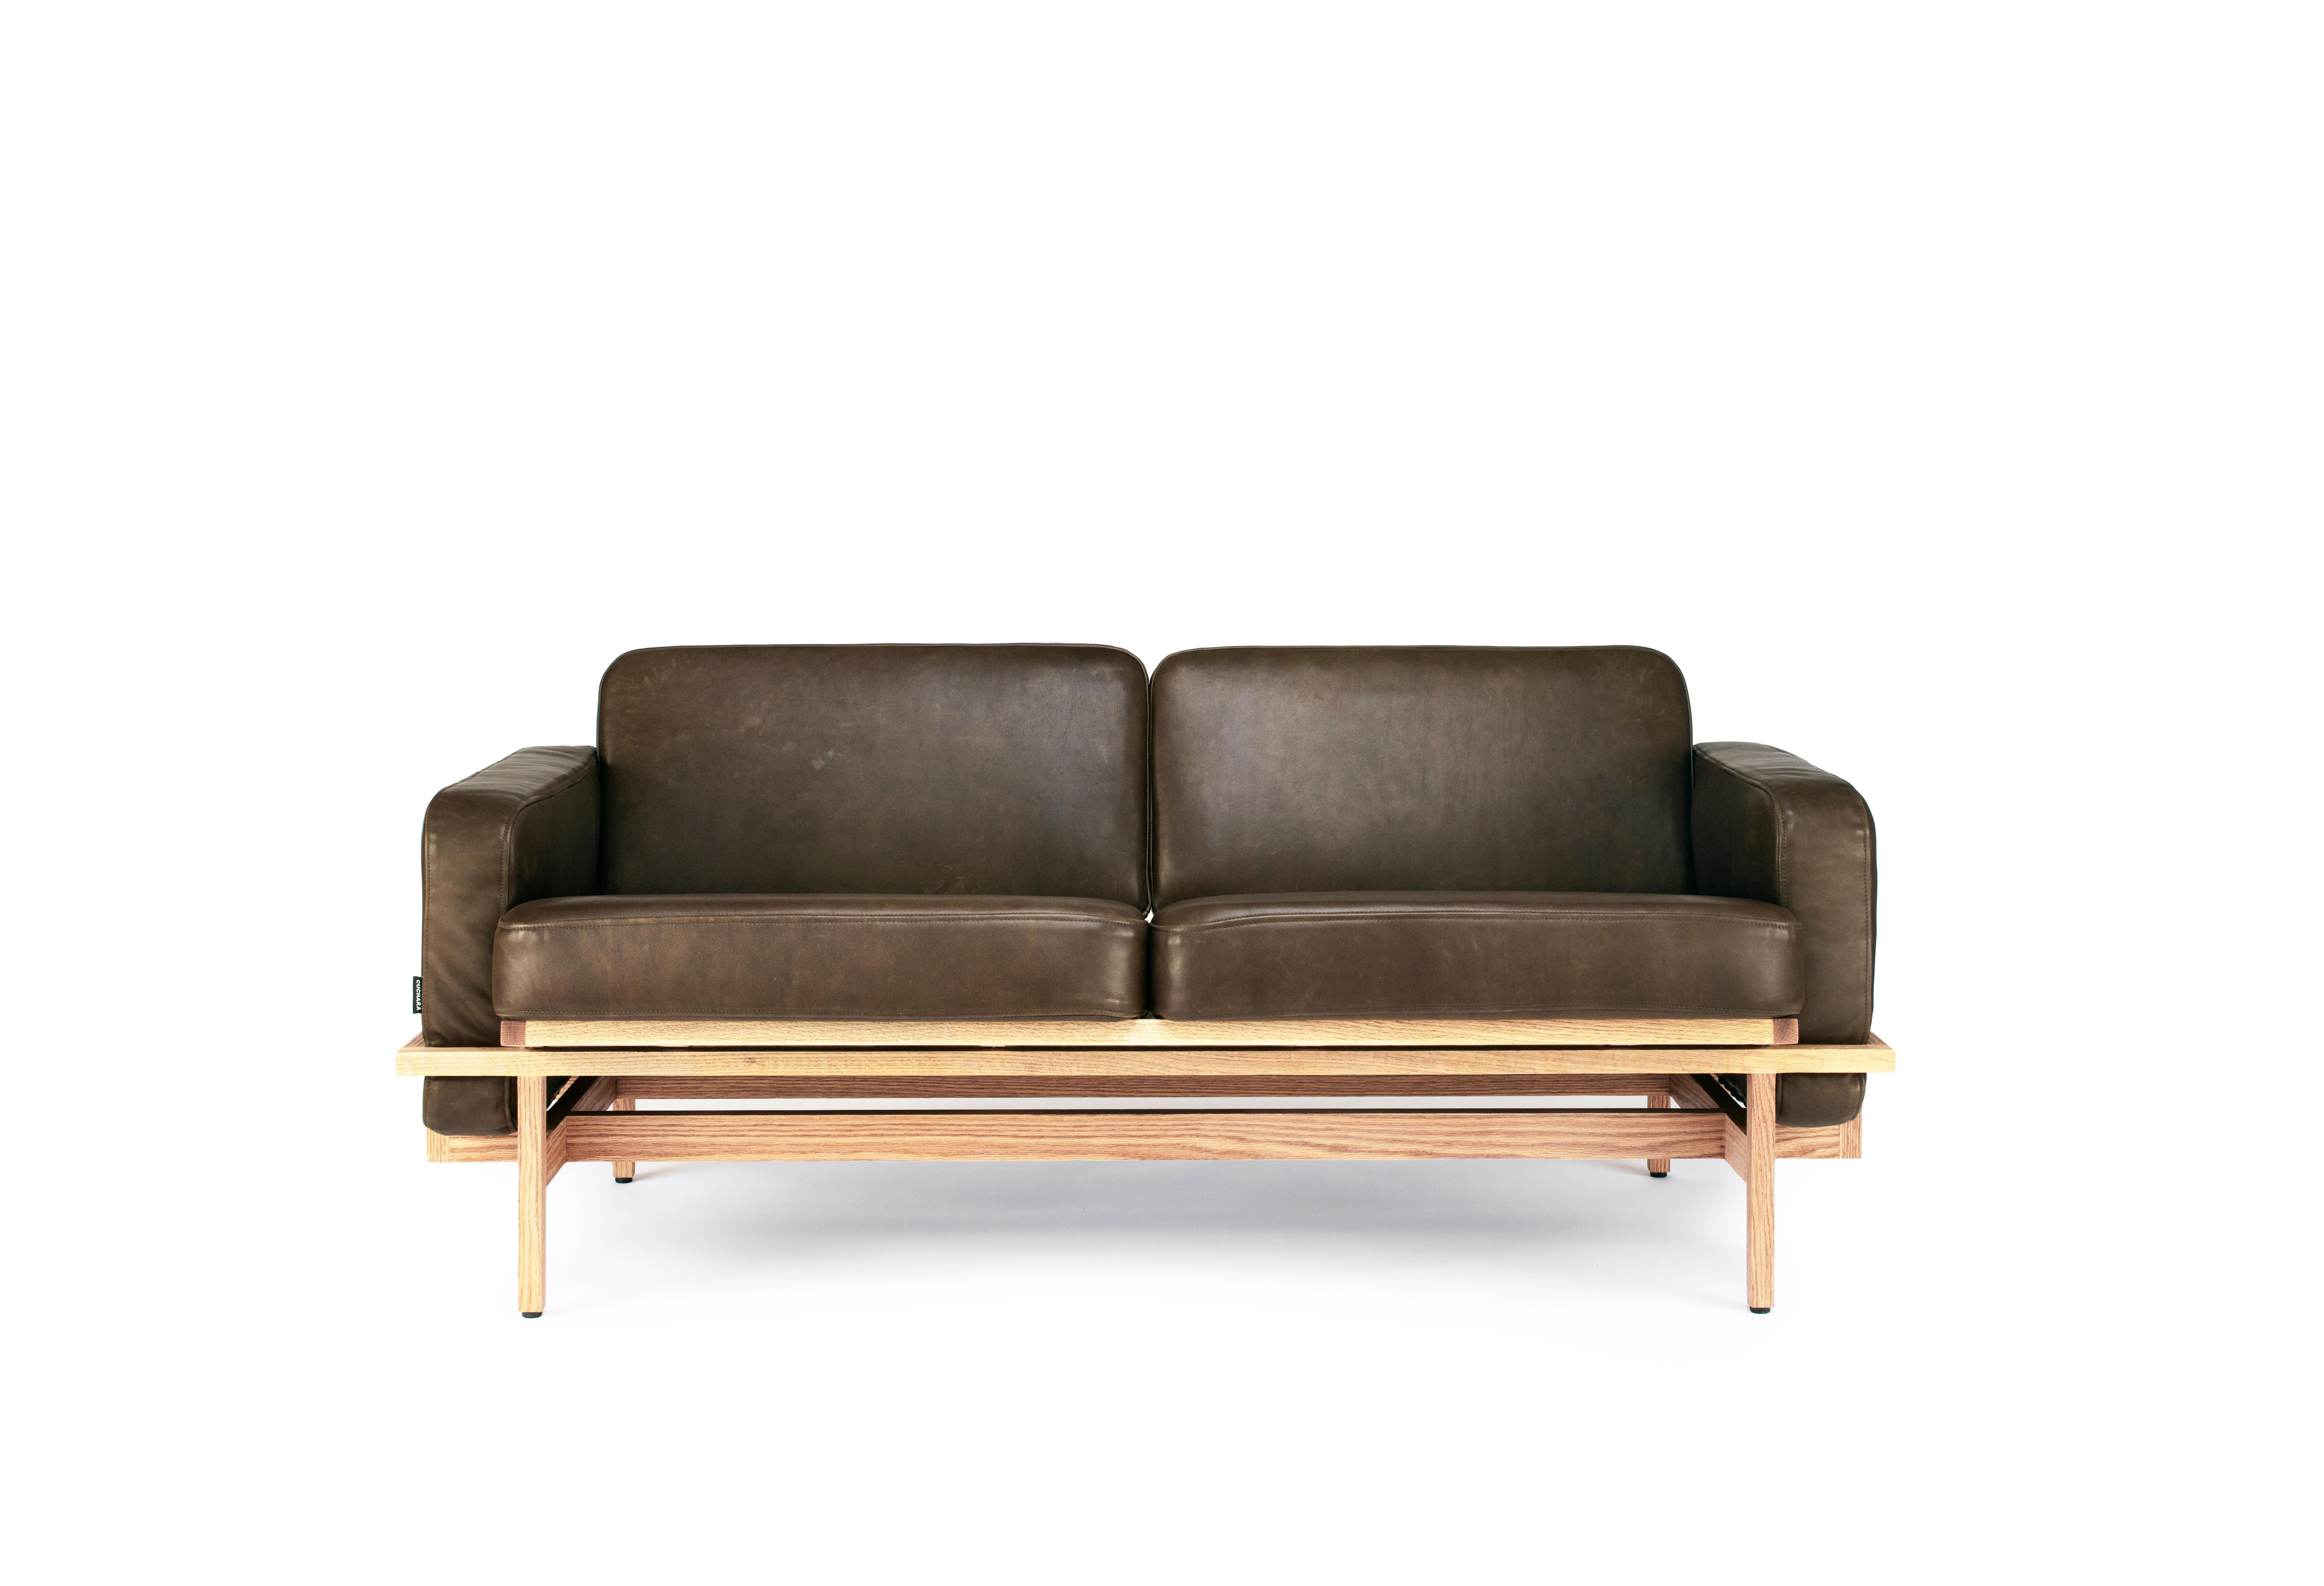 This loveseat is a true masterpiece of design and craftsmanship. The structure of the sofa stands tall, almost like a tribute to the art of furniture-making. The delicate framework of wood is not only visually stunning, but also allows for the